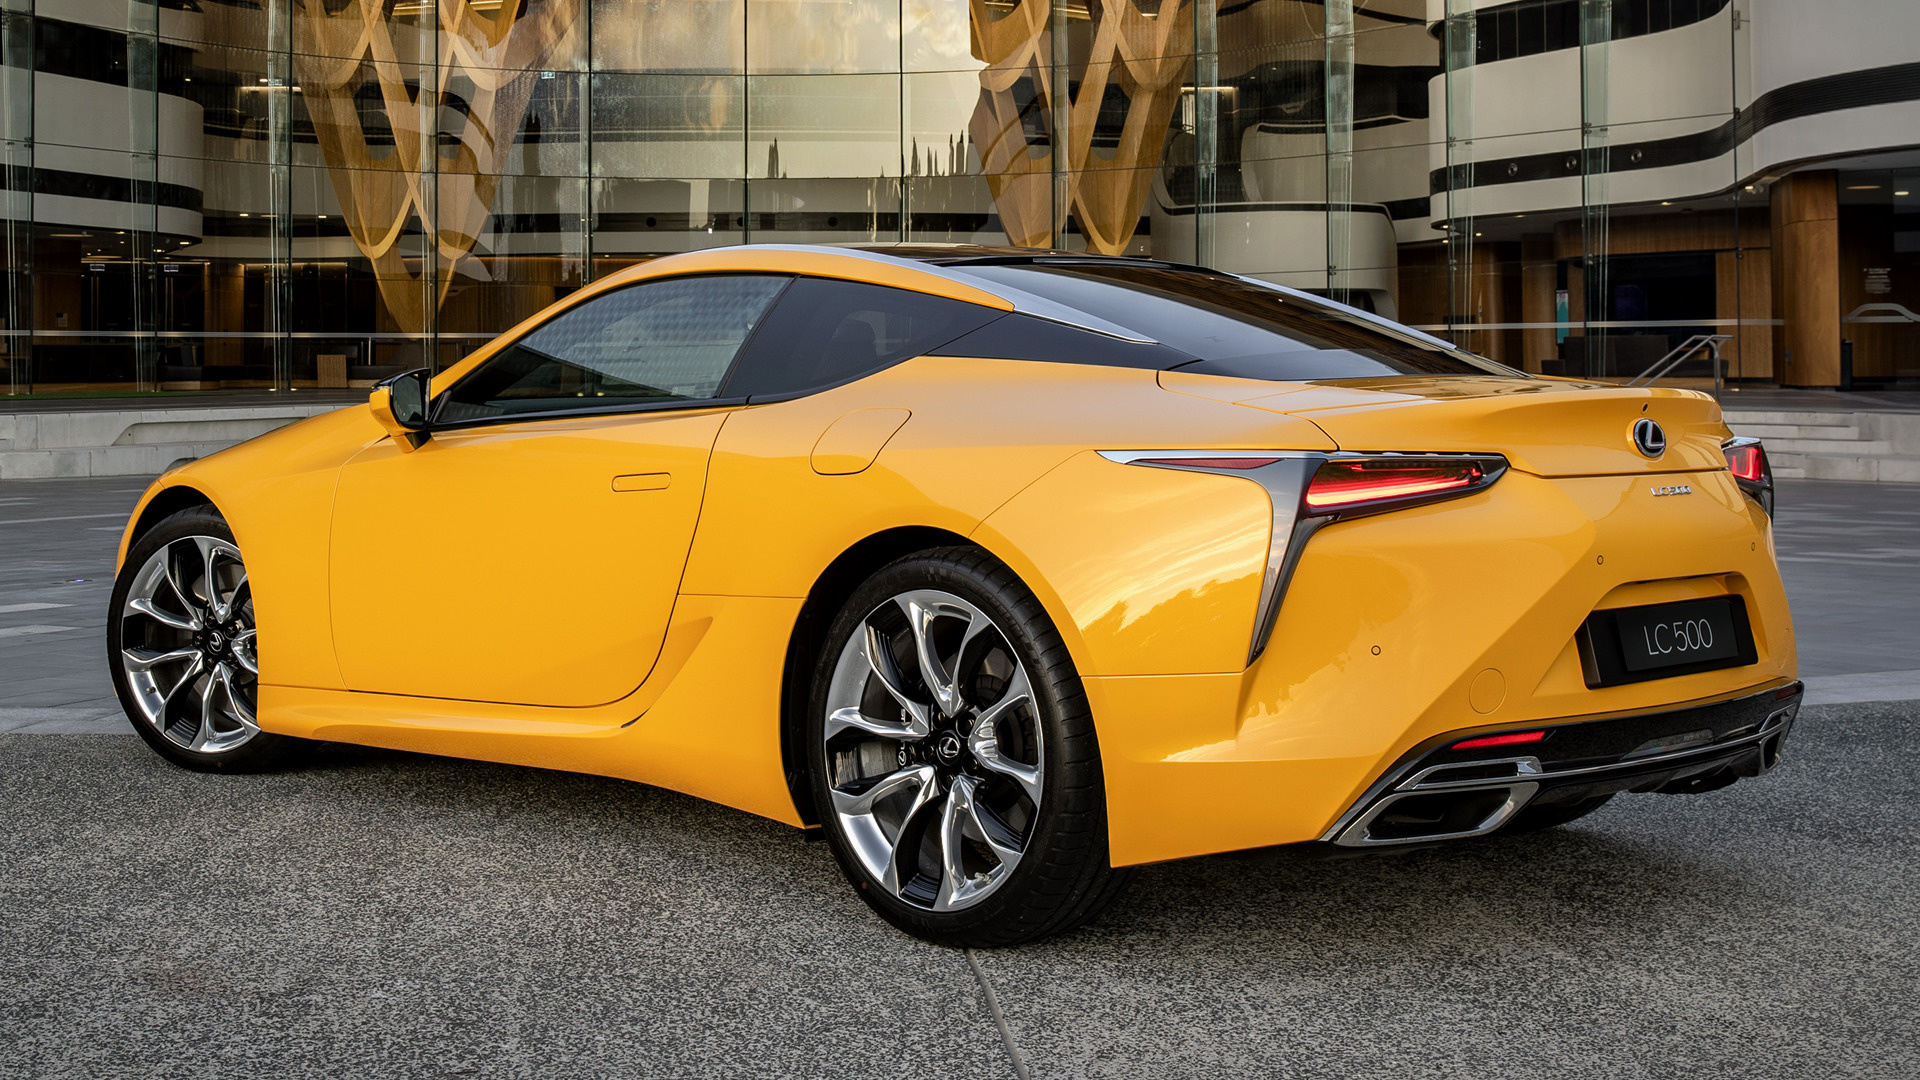 Car Coupe Grand Tourer Lexus Lc 500 Limited Edition Luxury Car Yellow Car 1920x1080